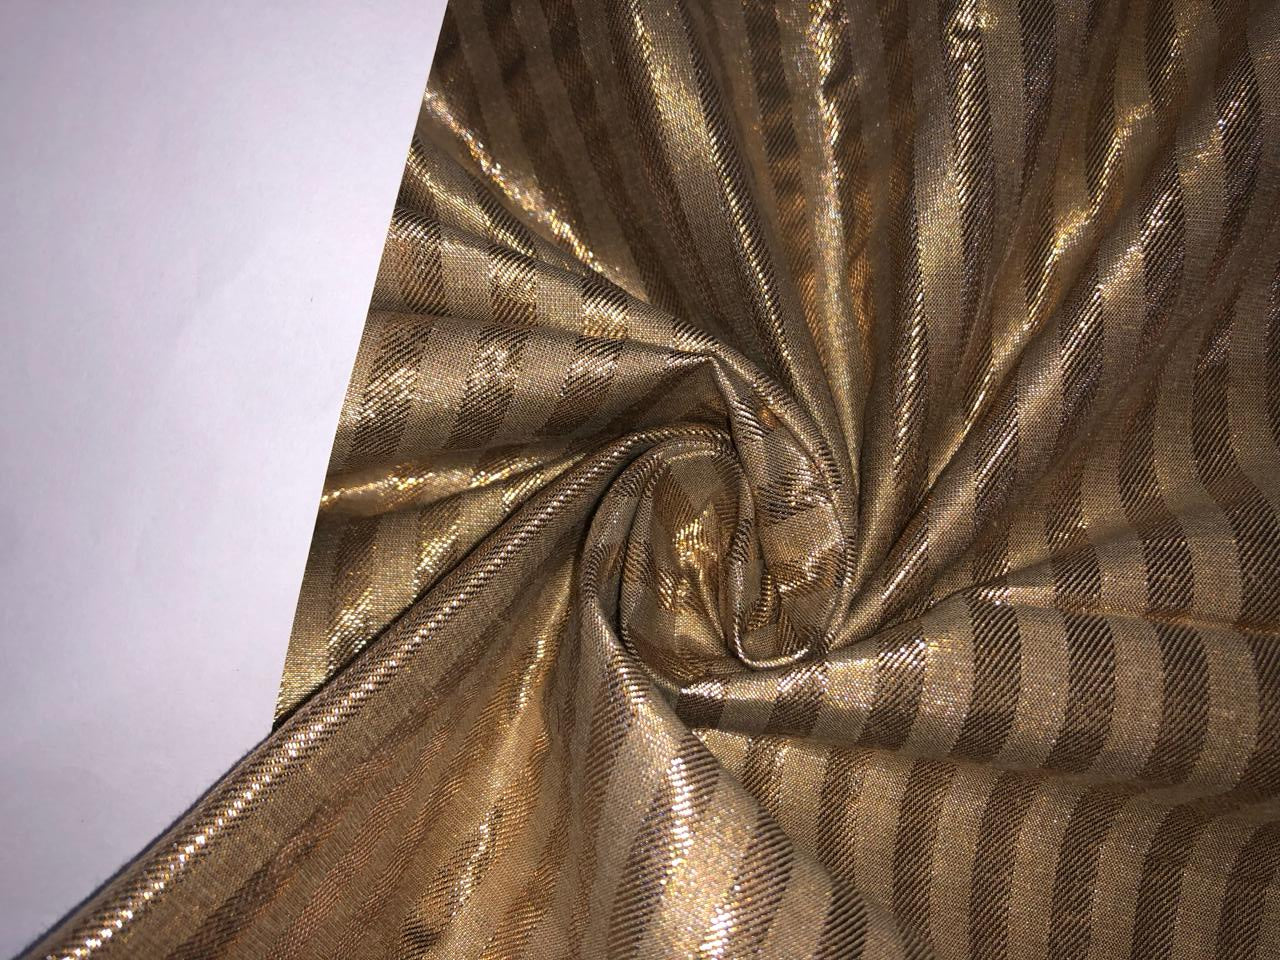 Cotton with lurex stripes available in 2 colors GOLD X GOLD and GOLD x SILVER